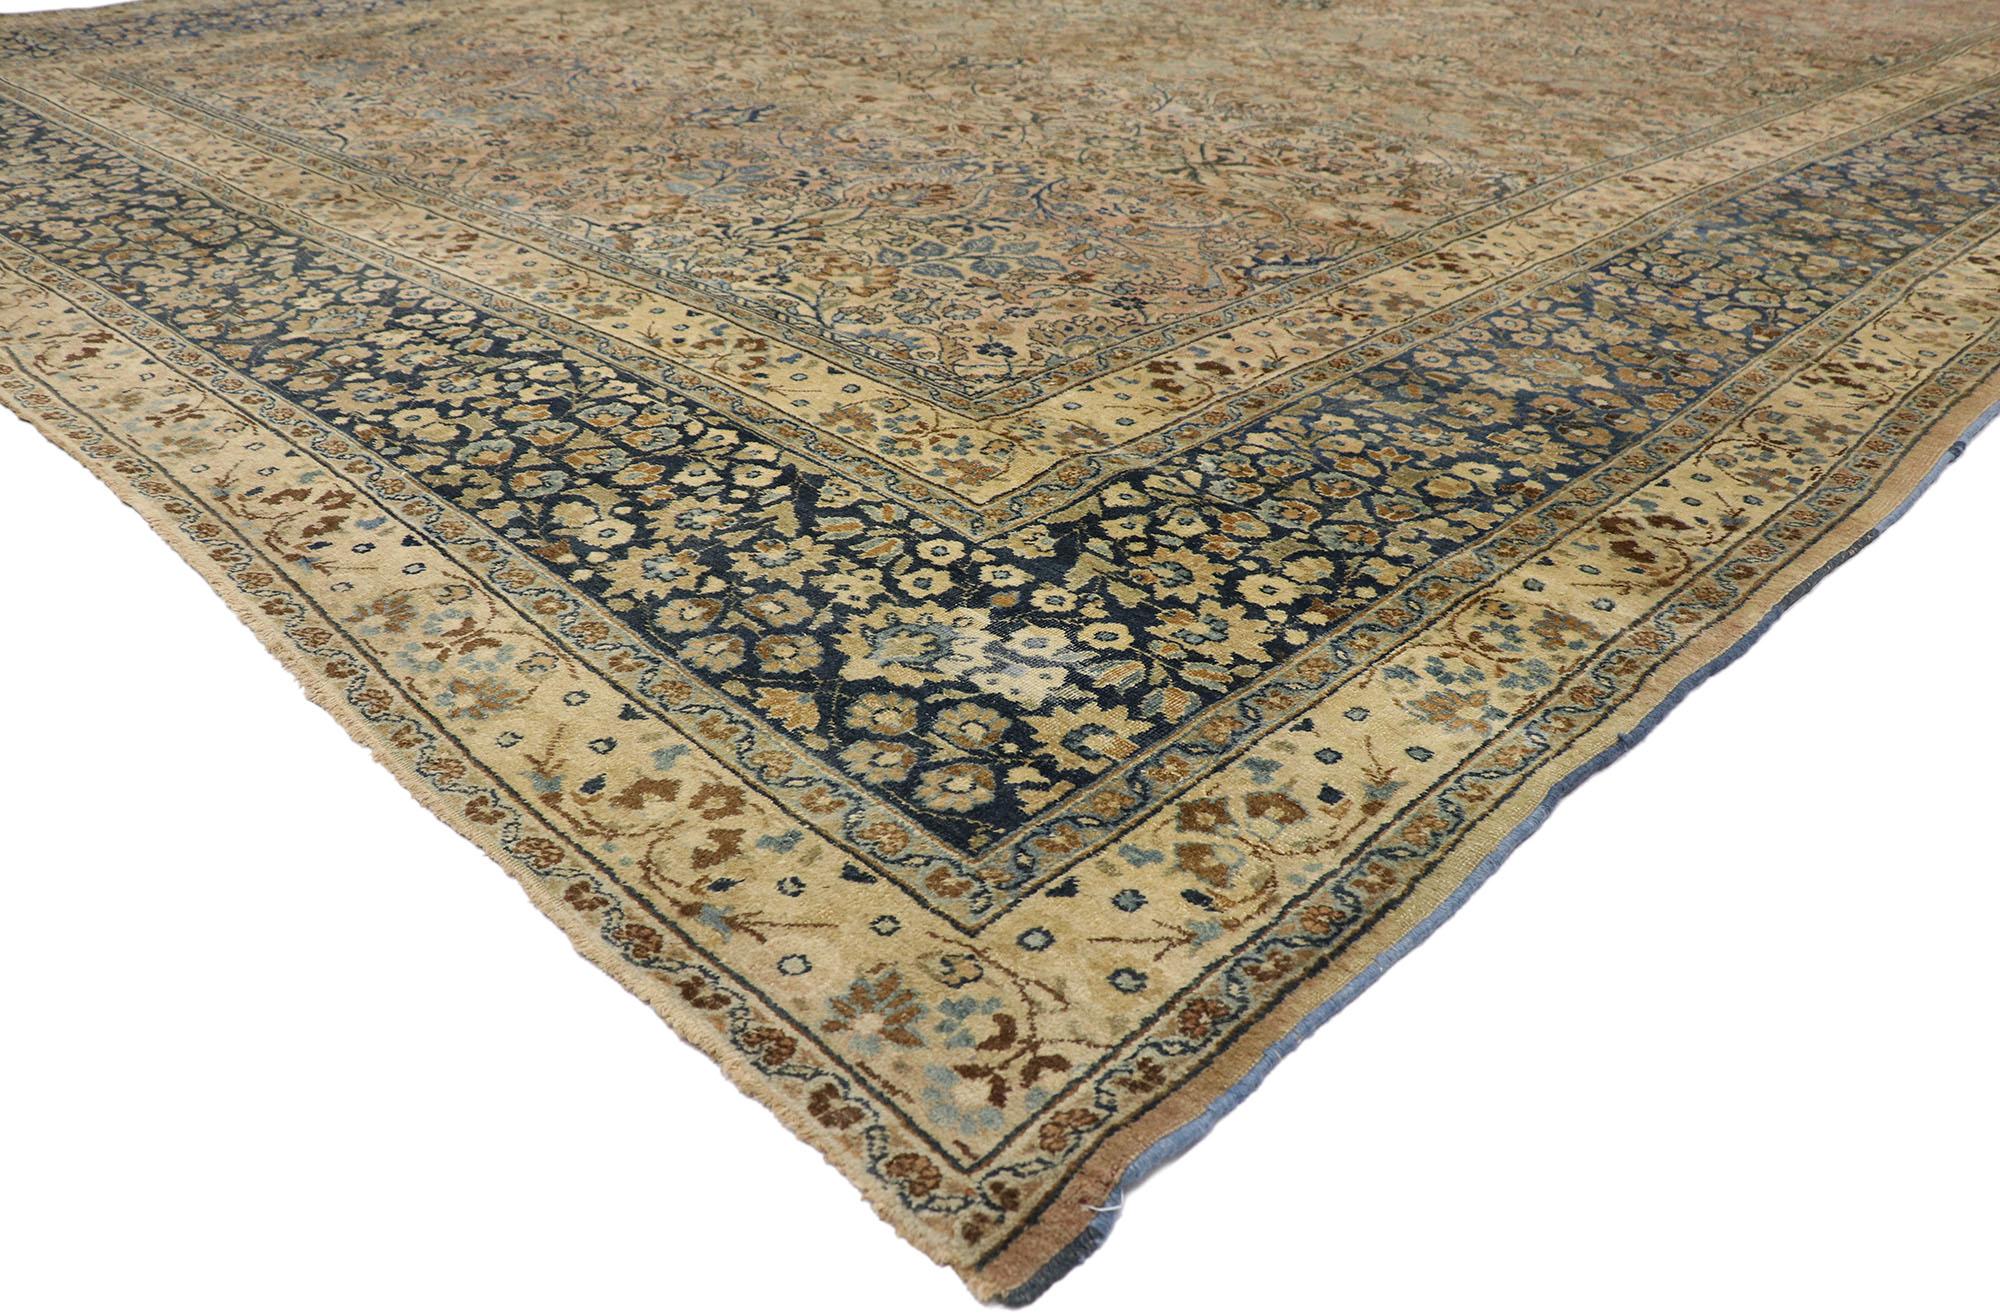 73829 antique Persian Mashhad rug with Renaissance Regency, 13'06 x 21'00. With naturalistic architectural elements and an opulent color scheme, this hand-knotted wool antique antique Persian Mashhad palace size rug embodies a combination of